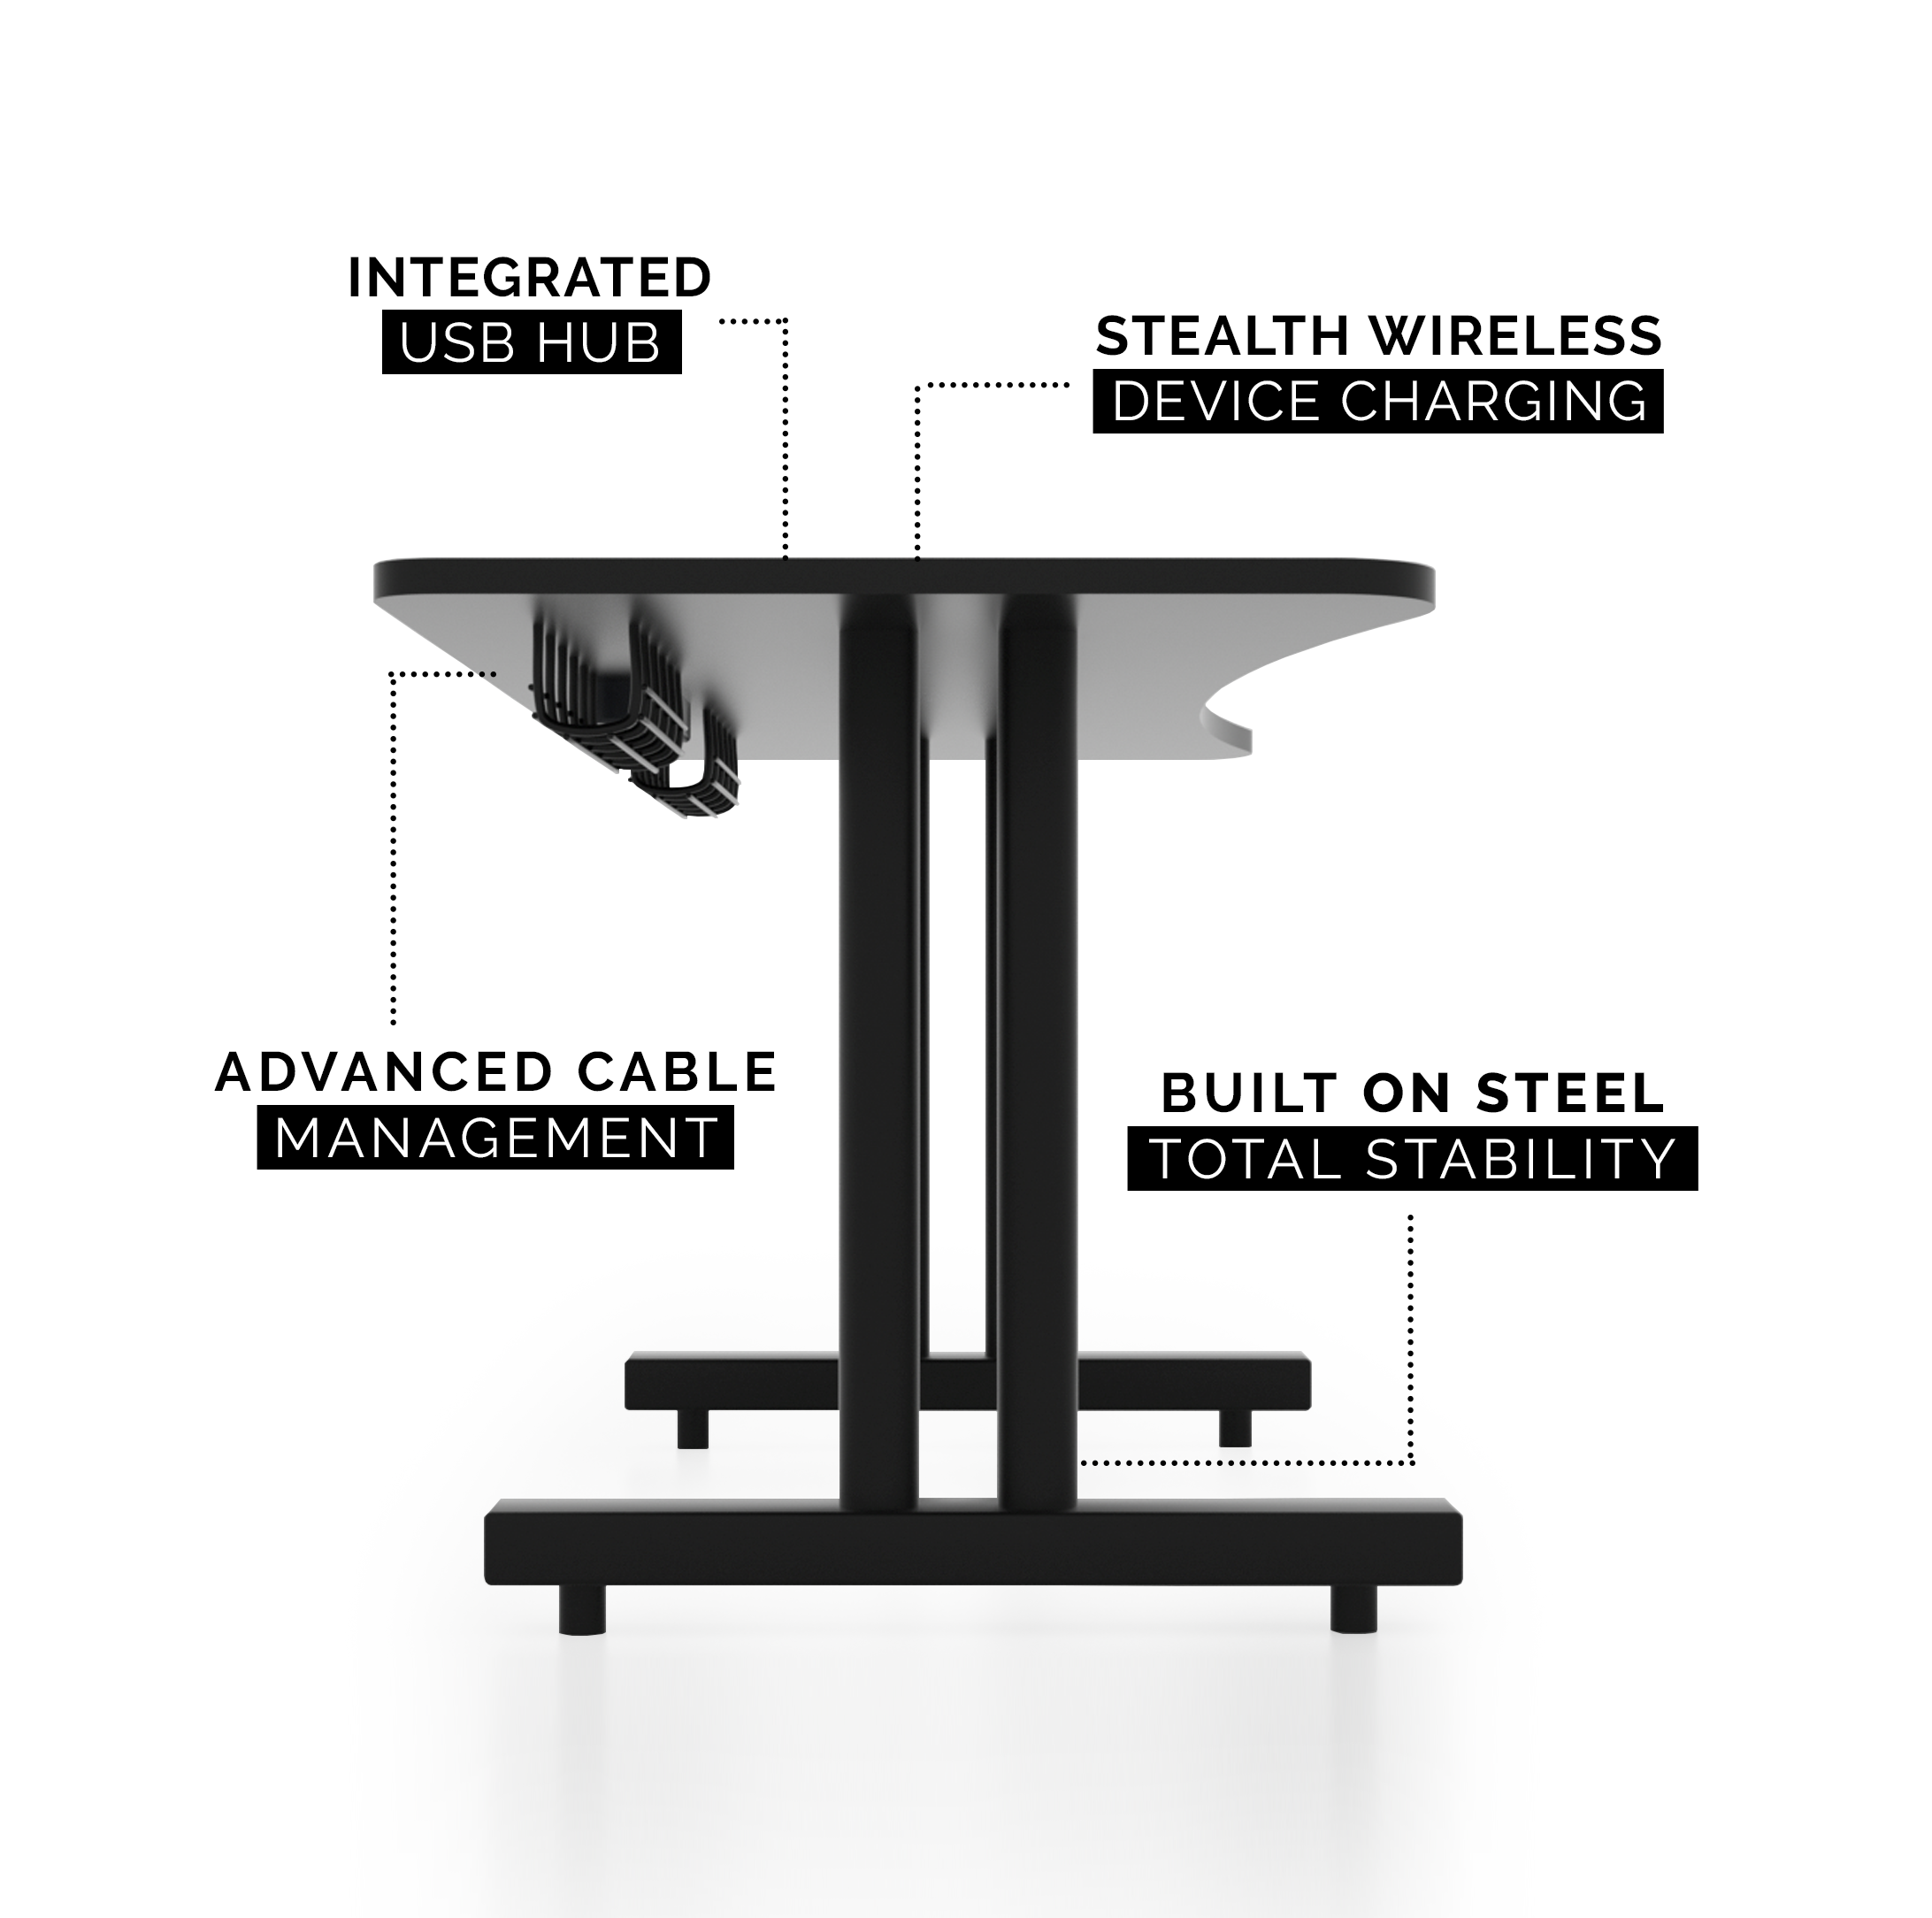 Infinity 2023 64 inch Gaming Desk - SALE!